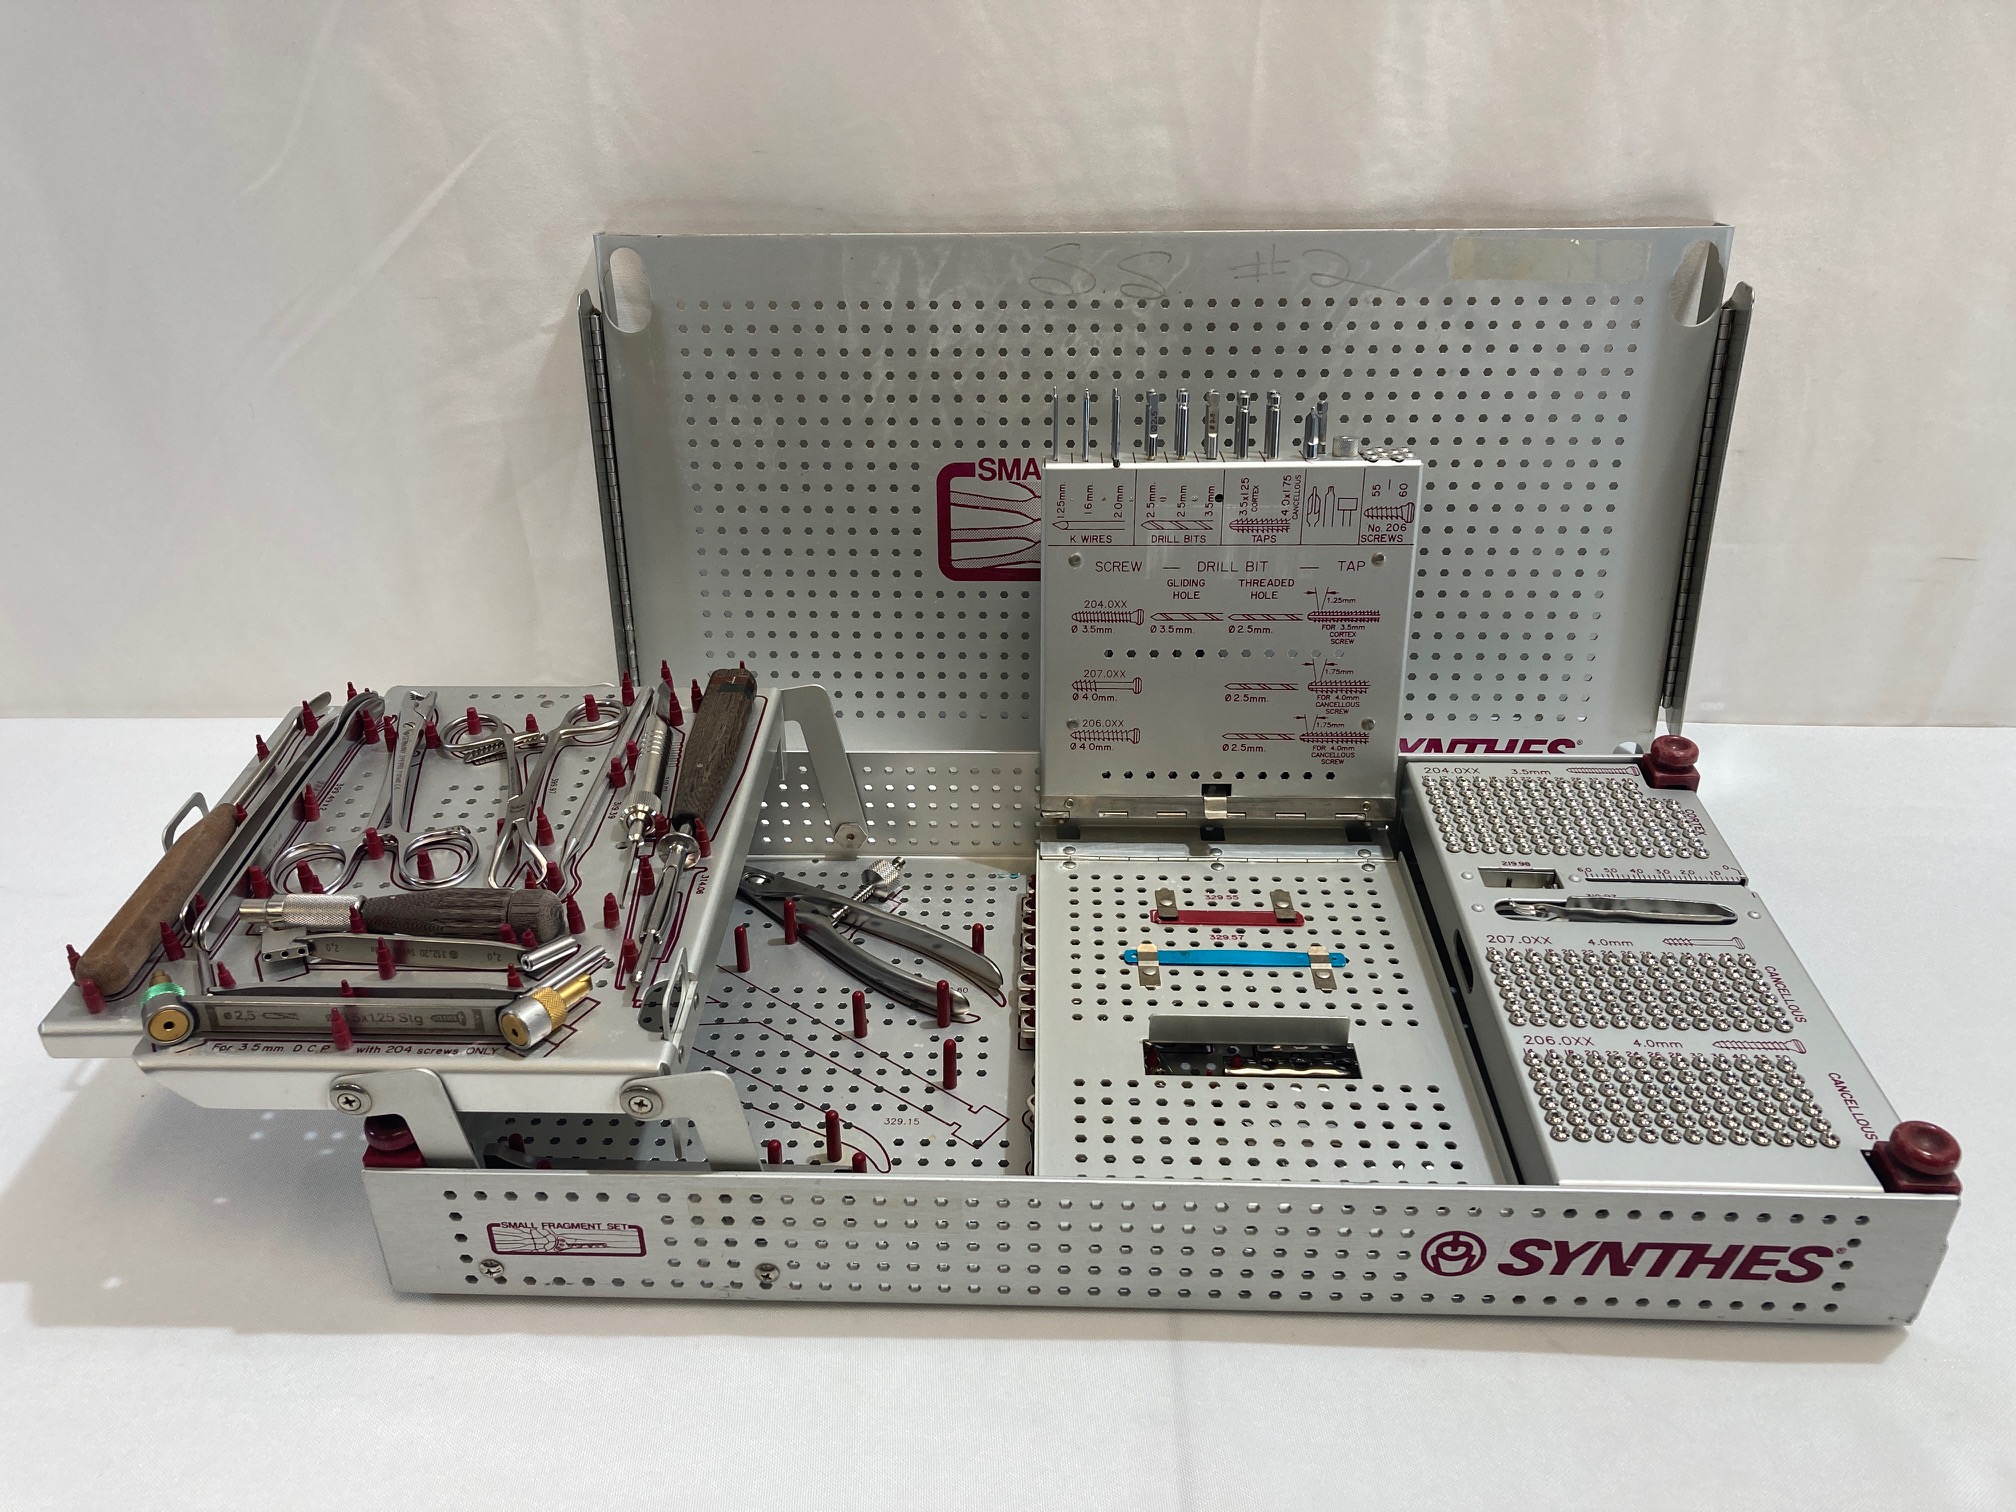 Synthes 105.408 Small Fragment Instrument & Implant Set CCMED462